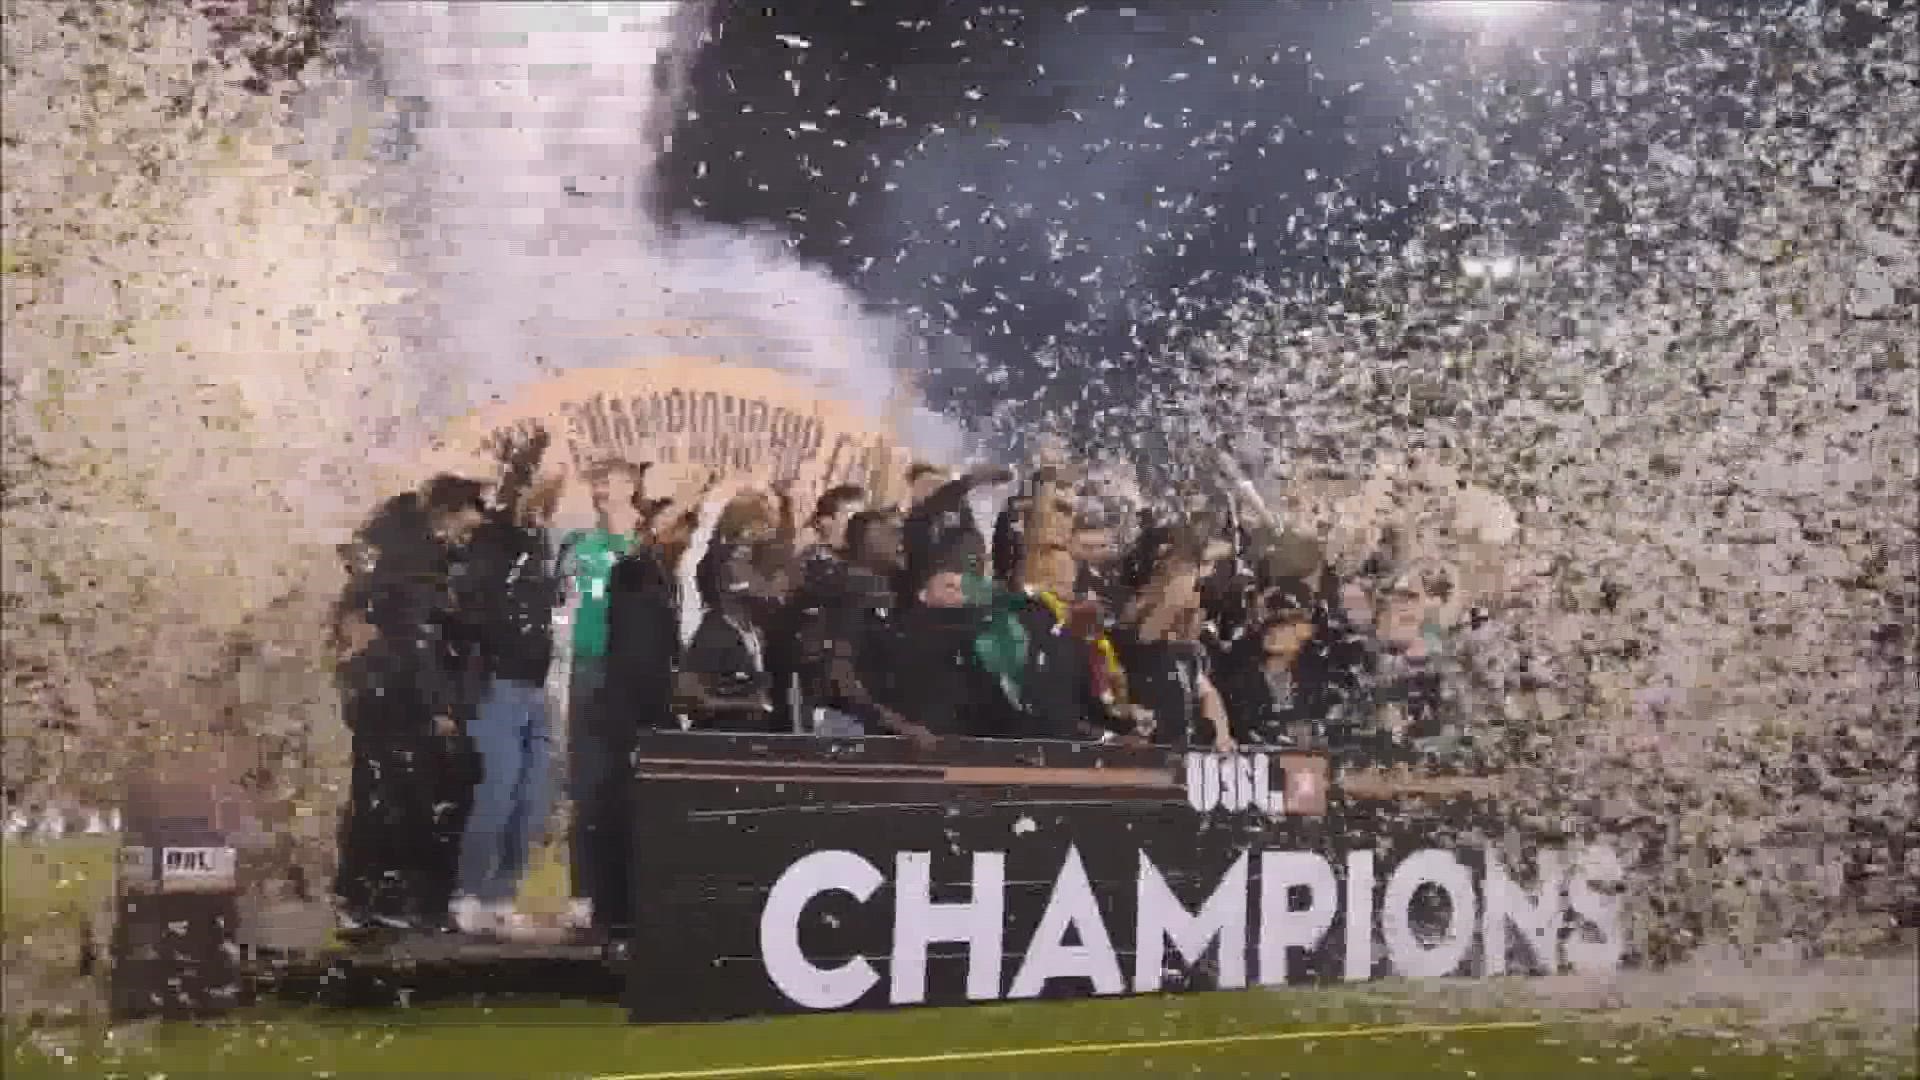 More than 8,000 fans were at Toyota Field to see San Antonio Football Club's victory.